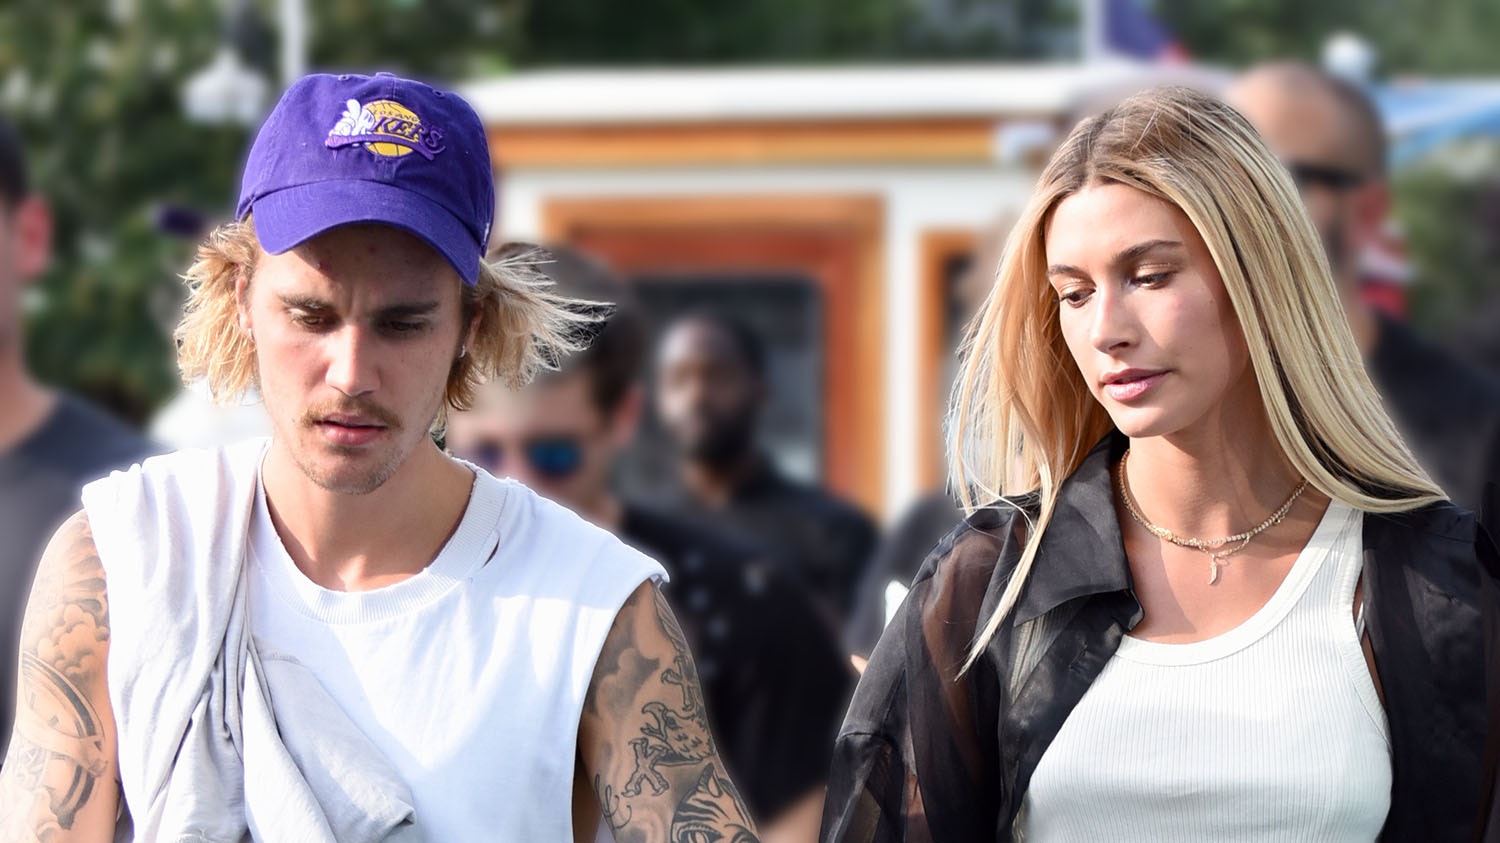 Hailey and Justin Bieber Match In Valentine's Day Red For a Night Out